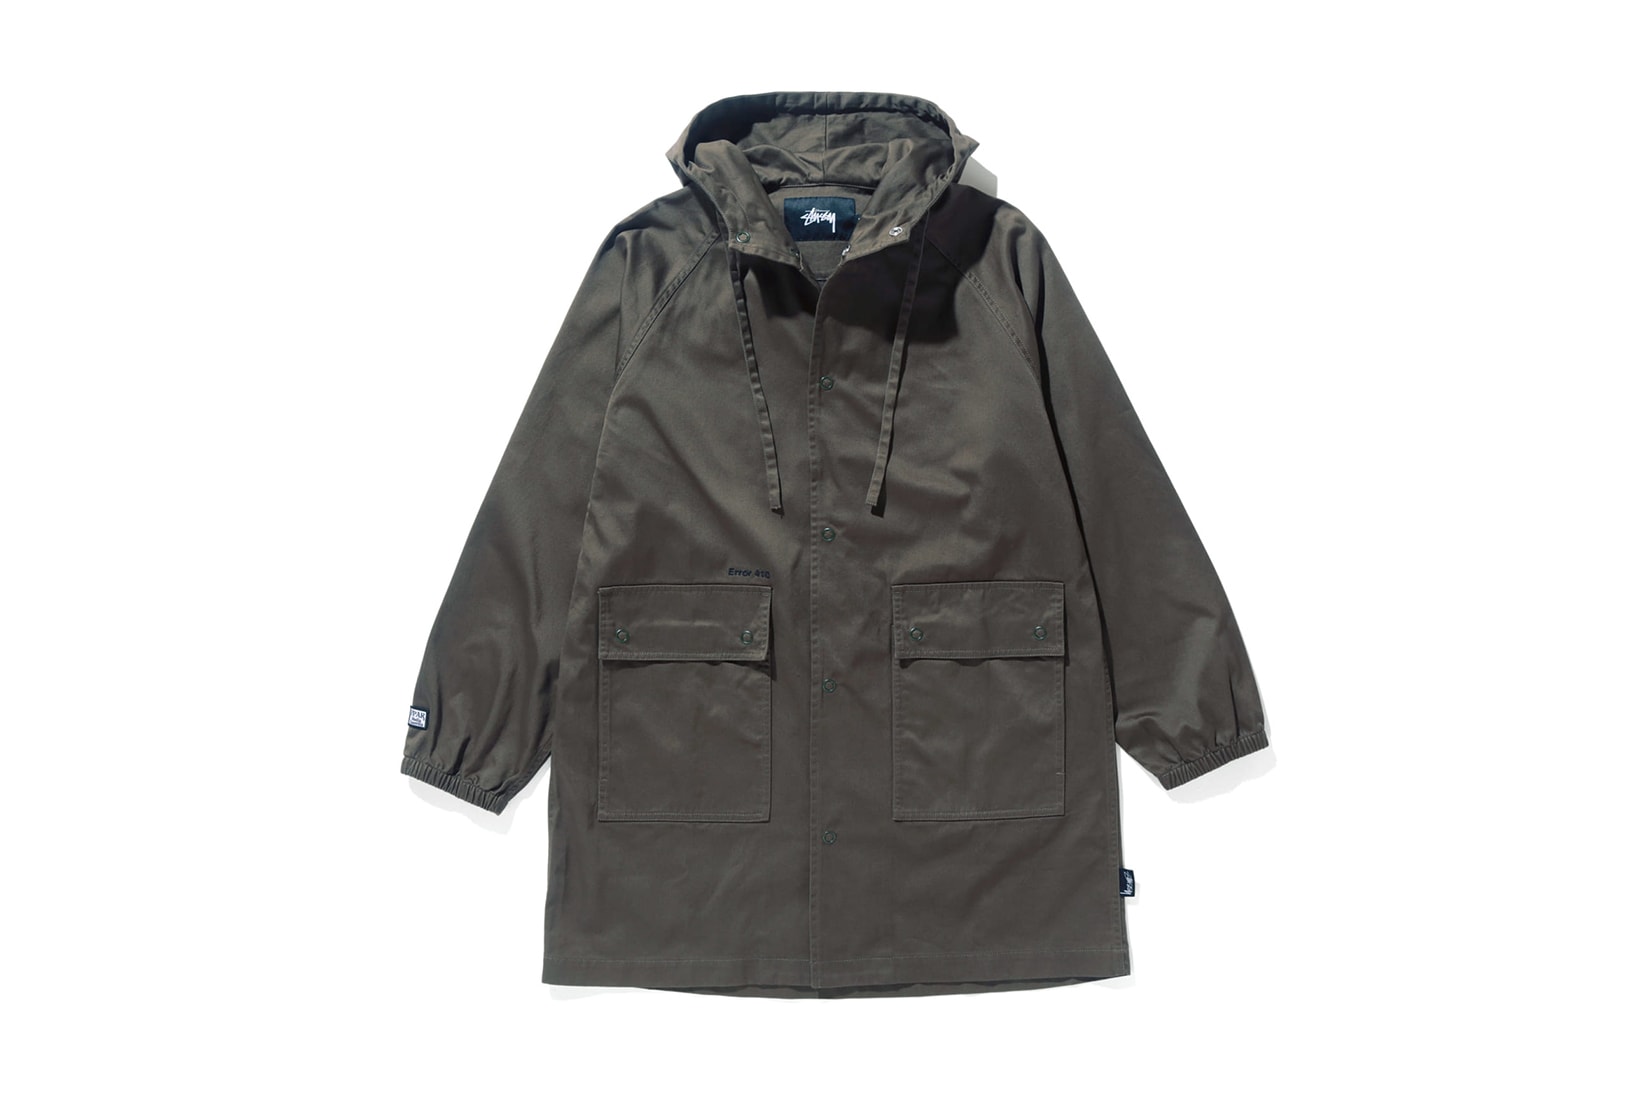 Stussy FORTY PERCENTS AGAINST RIGHTS Parka FPAR 2017 Fall Winter Olive Drab Green Collaboration November Release Date Info pop-up collaboration qr code isetan shinjuku embroidery Japan Tetsu Nishiyama